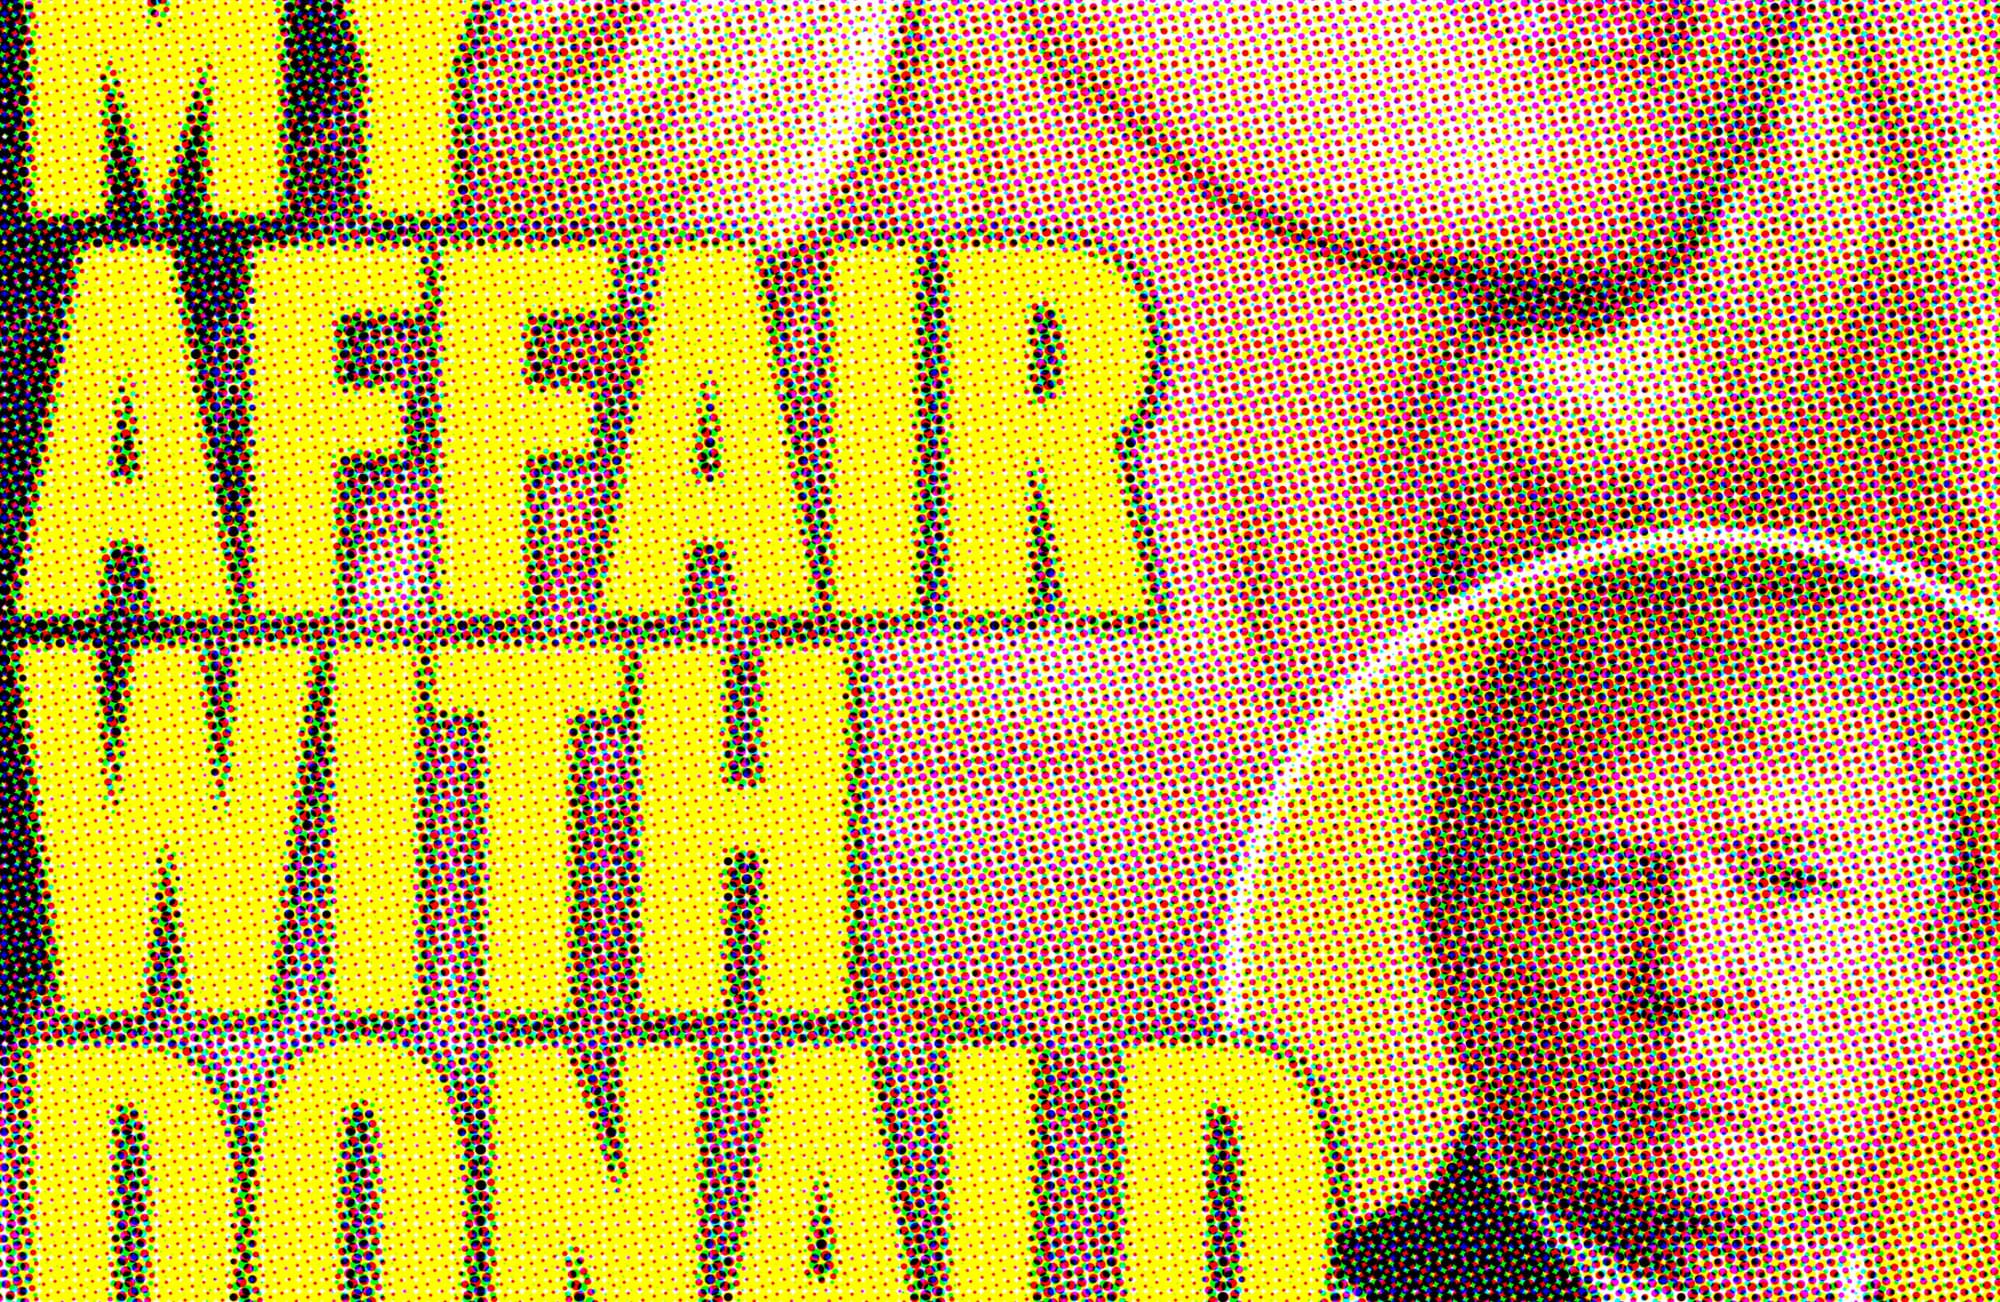 Detail of InTouch cover, 3/25/18, headline 'My Affair With Donald' with Stormy Daniels and inset of Donald Trump